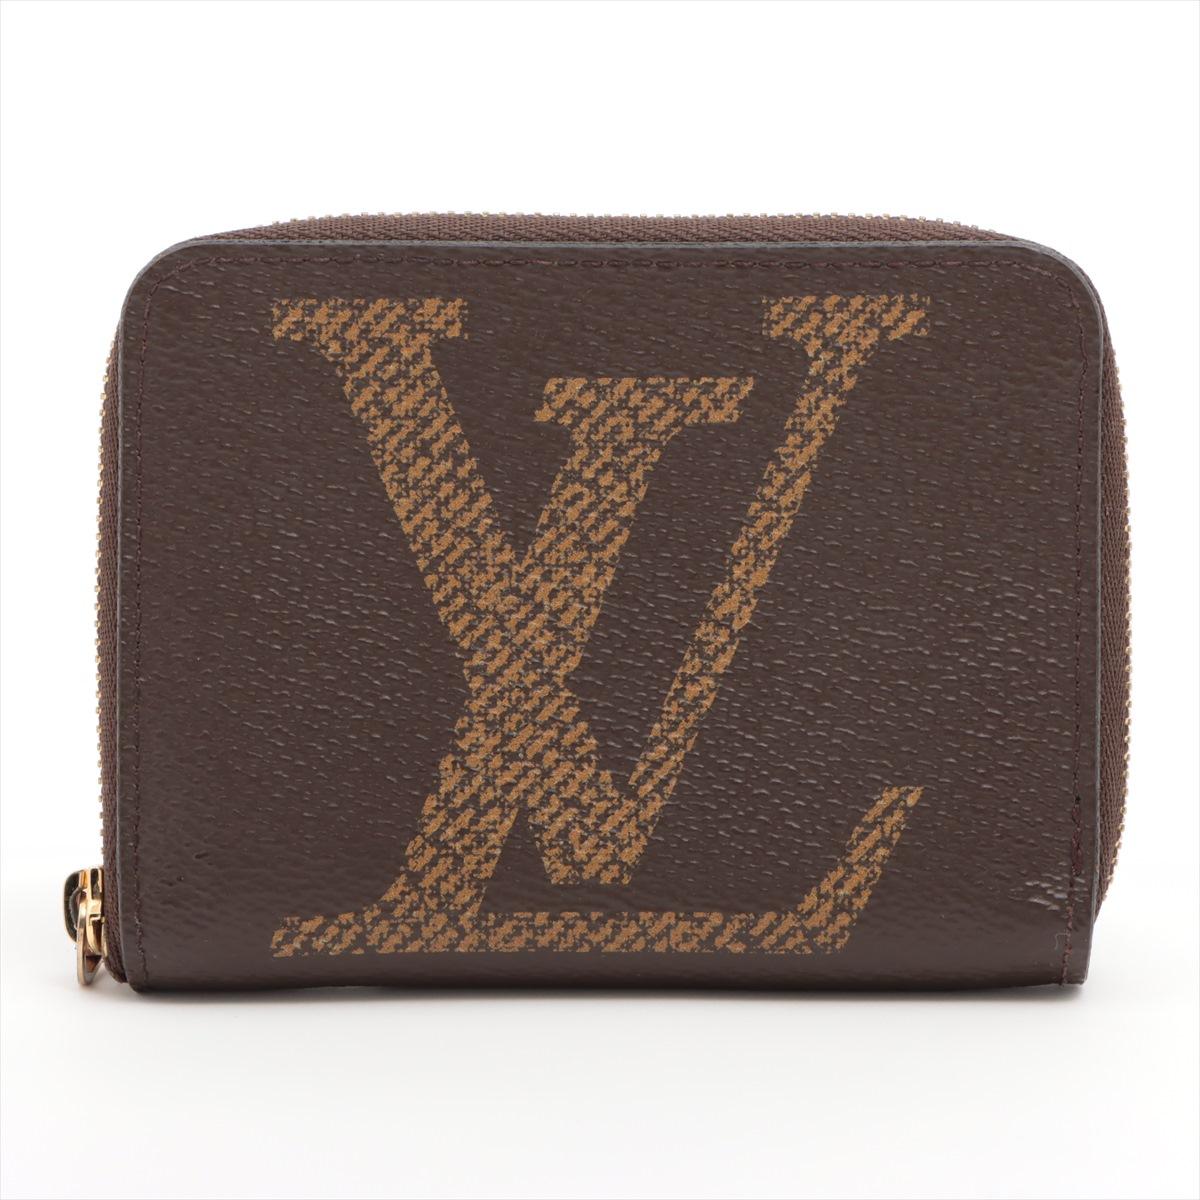 The Louis Vuitton Monogram Giant Zippy Coin Purse is a luxurious and practical accessory. The coin purse showcases the timeless and instantly recognizable LV monogram pattern. The maxi-sized LV initials and Monogram blossoms of the Giant Monogram